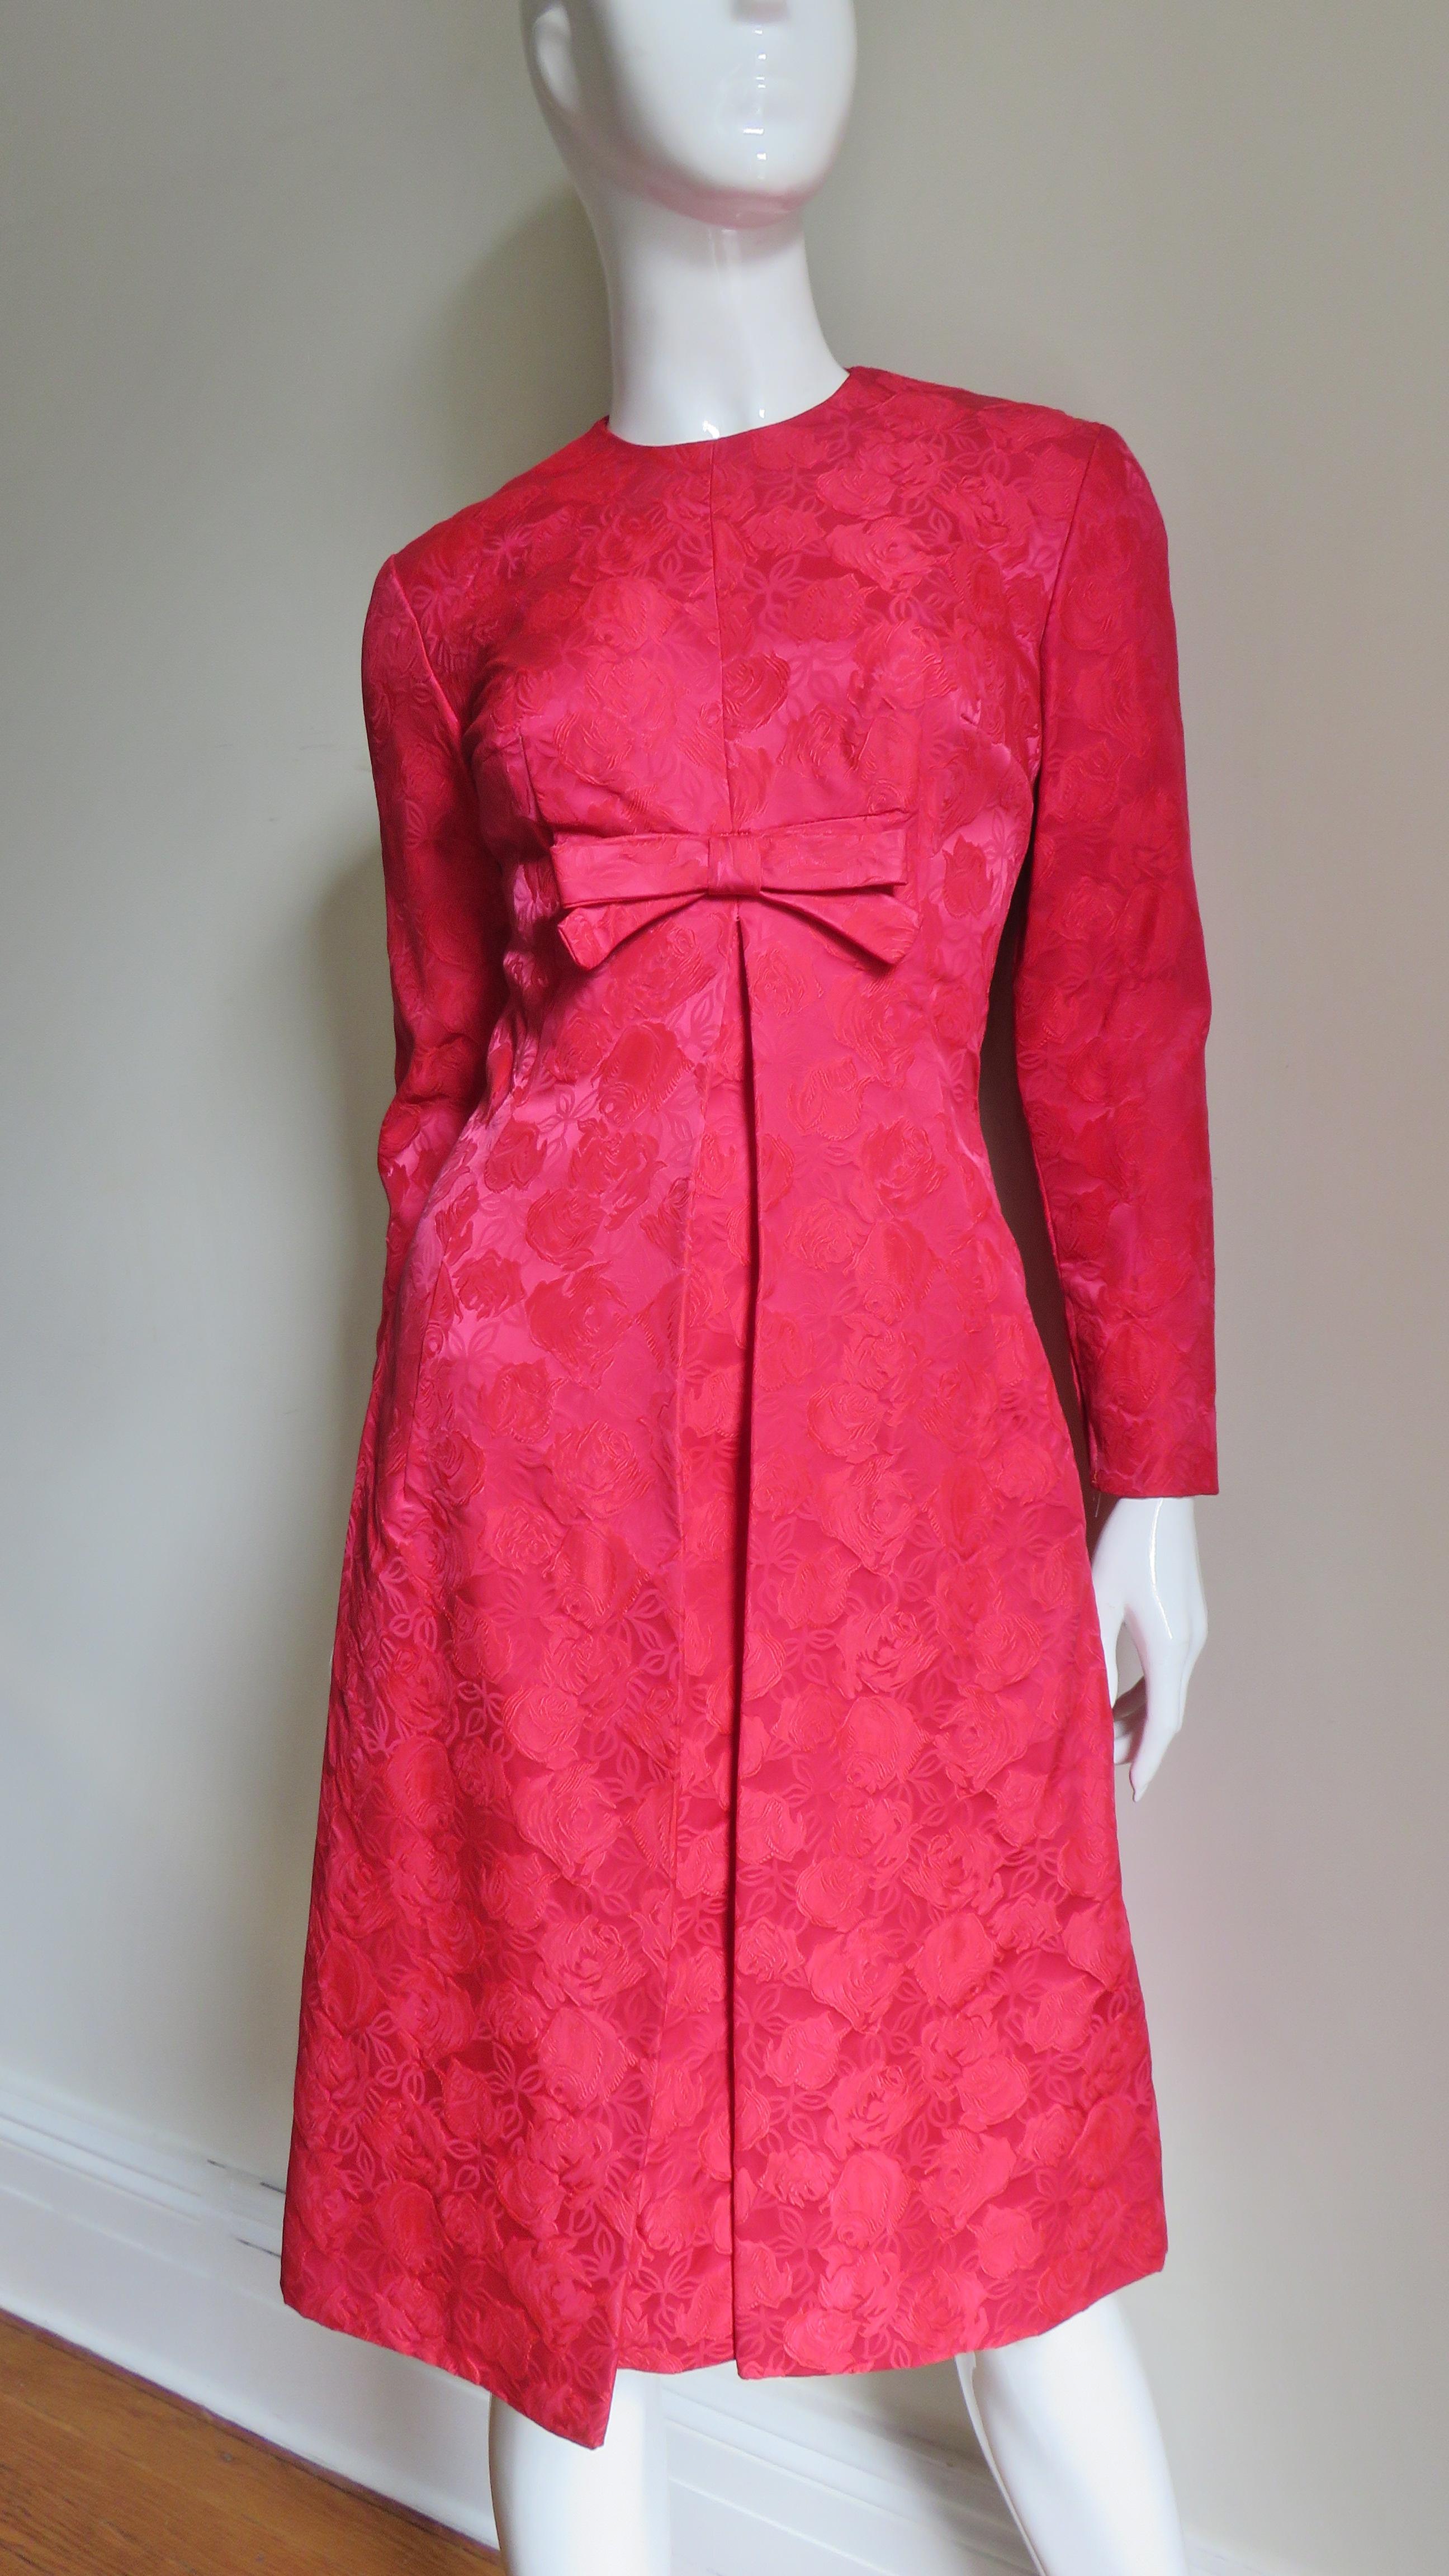 A rare dress set from Suzy Perette made in a rosy red detailed rose pattern damask.  It is actually 2 separate dresses - a fitted sheath underneath with a slightly flared dress over.  The sheath is sleeveless with a crew neckline.  The fitted long